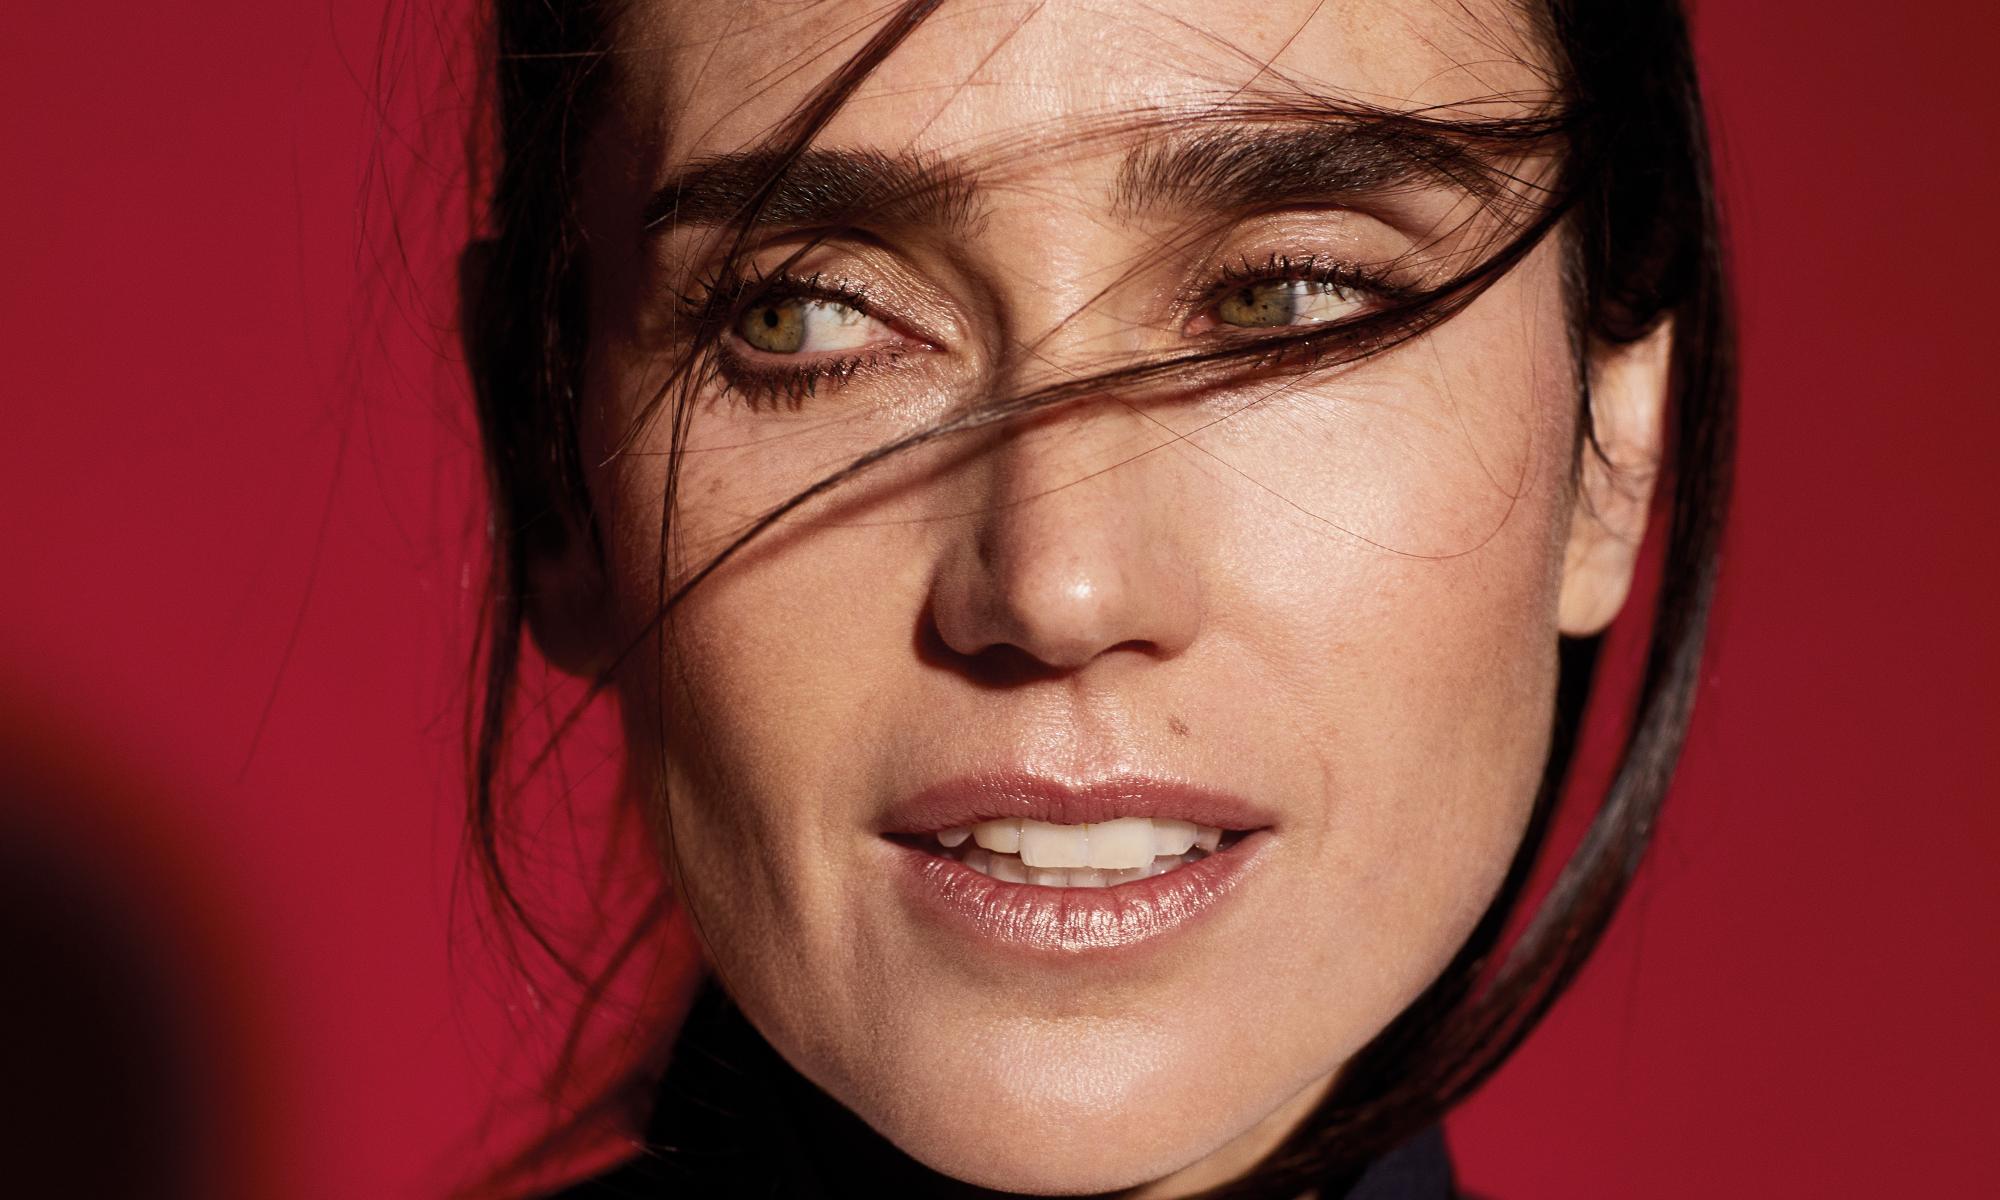 ‘i get a little stir-crazy’: jennifer connelly on david bowie, working with family and going back to college